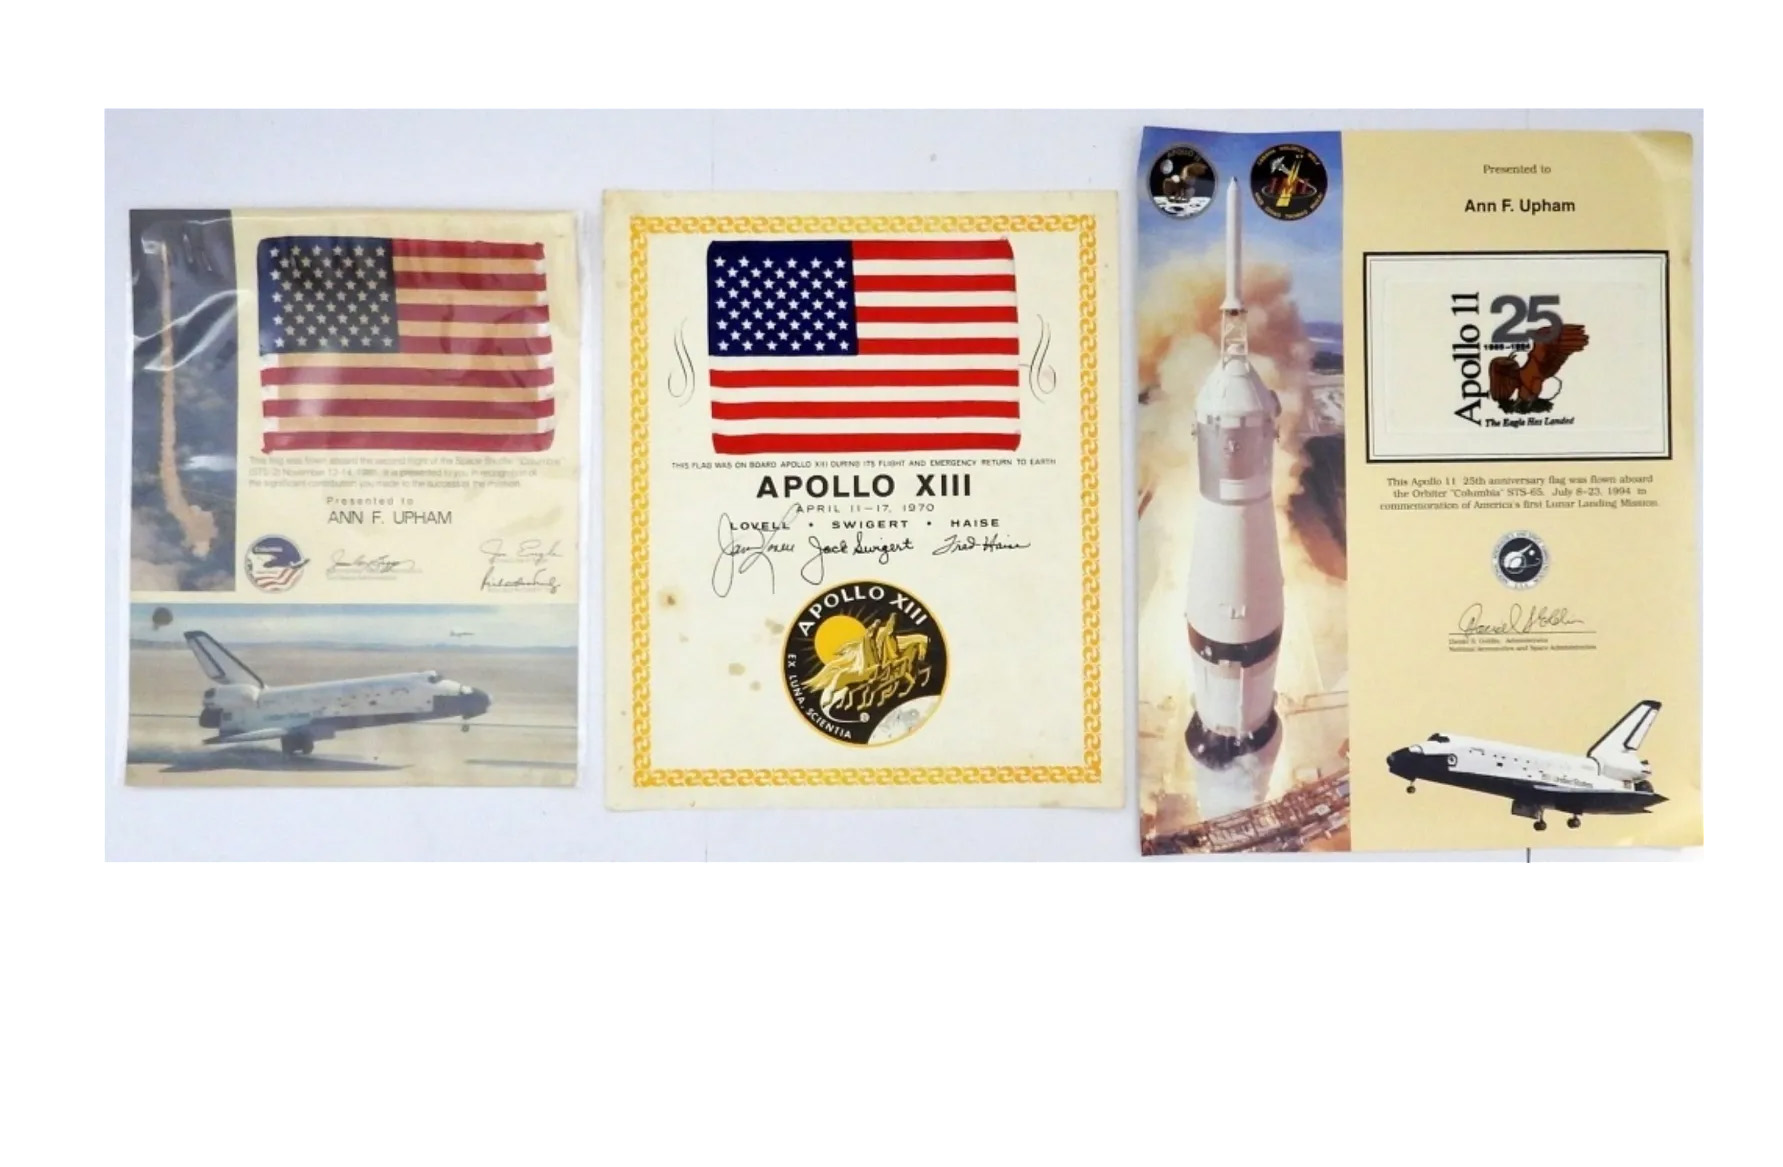 Space-flown American flags from Apollo 13 and shuttle missions, plus additional memorabilia, $5,100 ($5,992 with buyer's premium) at Vintage Auctions.